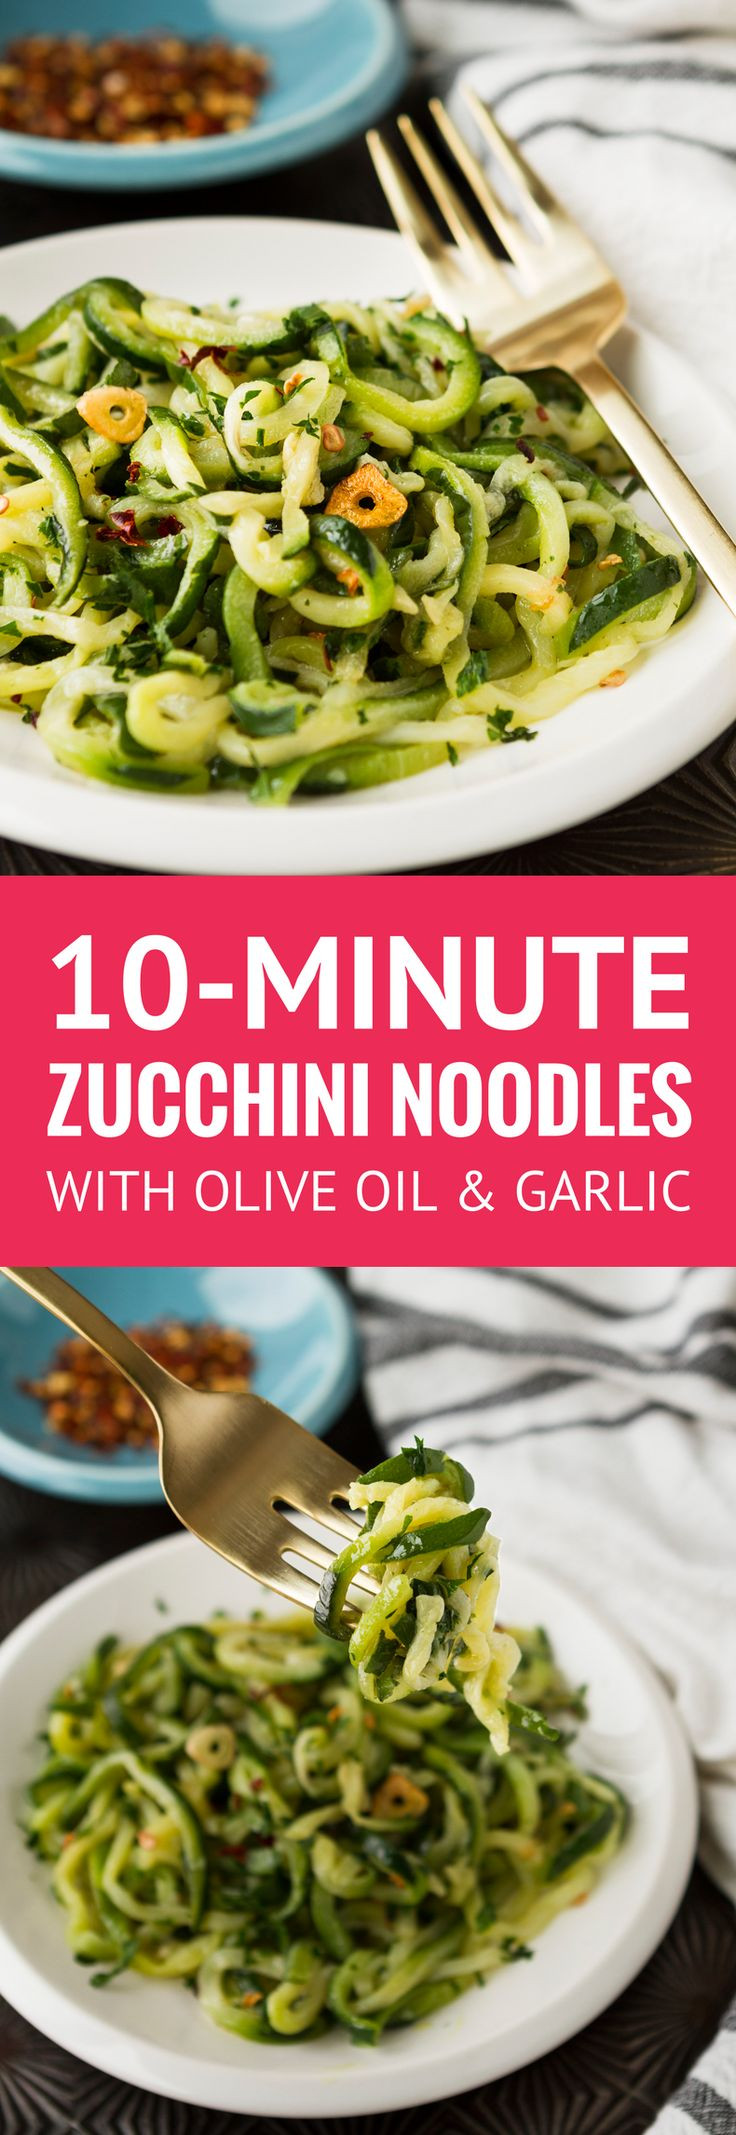 Premade Zucchini Noodles
 10 Minute Zucchini Noodles 3 ingre nts plus a bag of